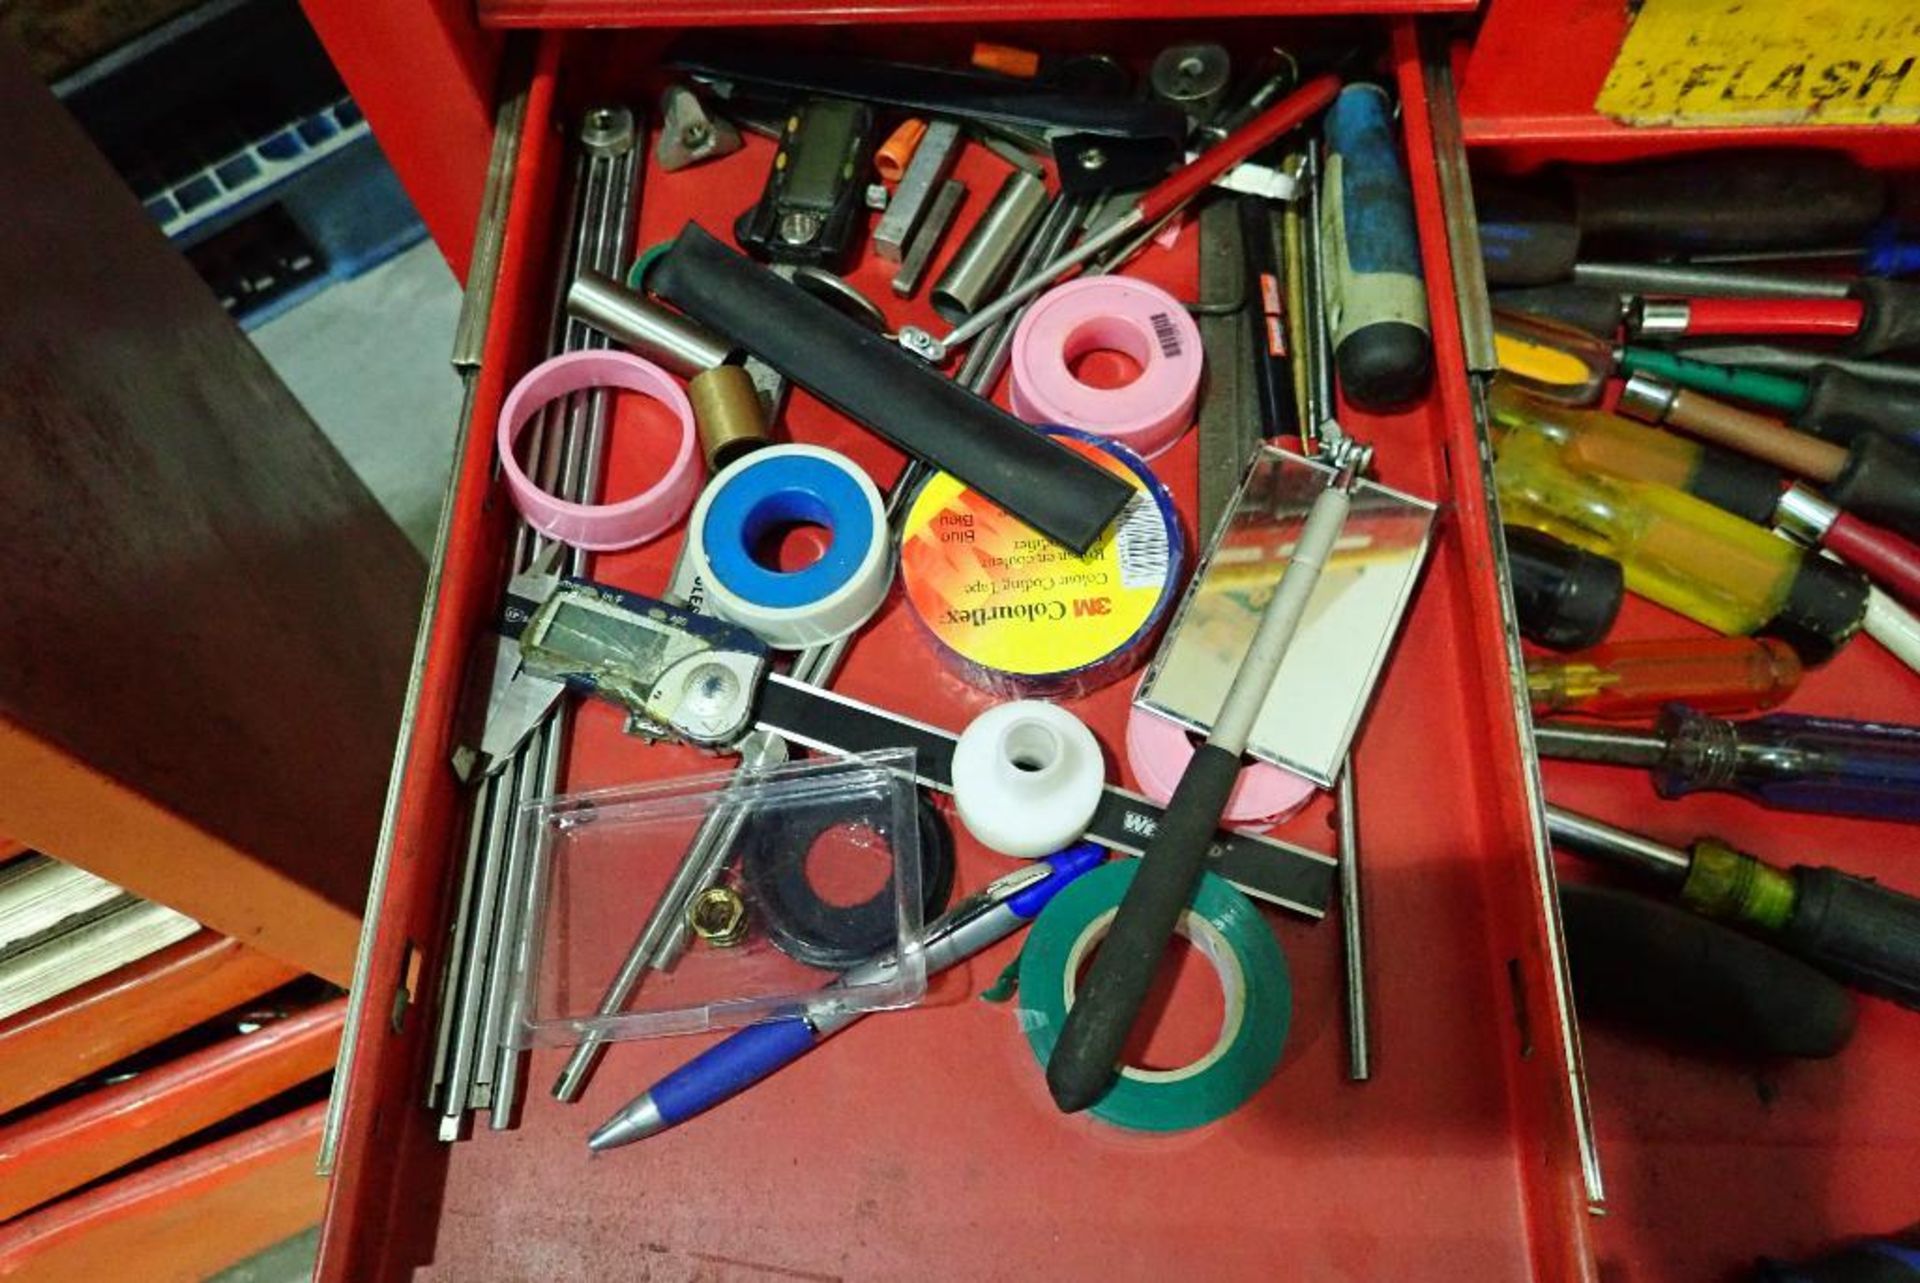 (2) tool chests with contents, wrenches, sockets, drill bits screw drivers, air tools, hammers, plie - Image 8 of 31